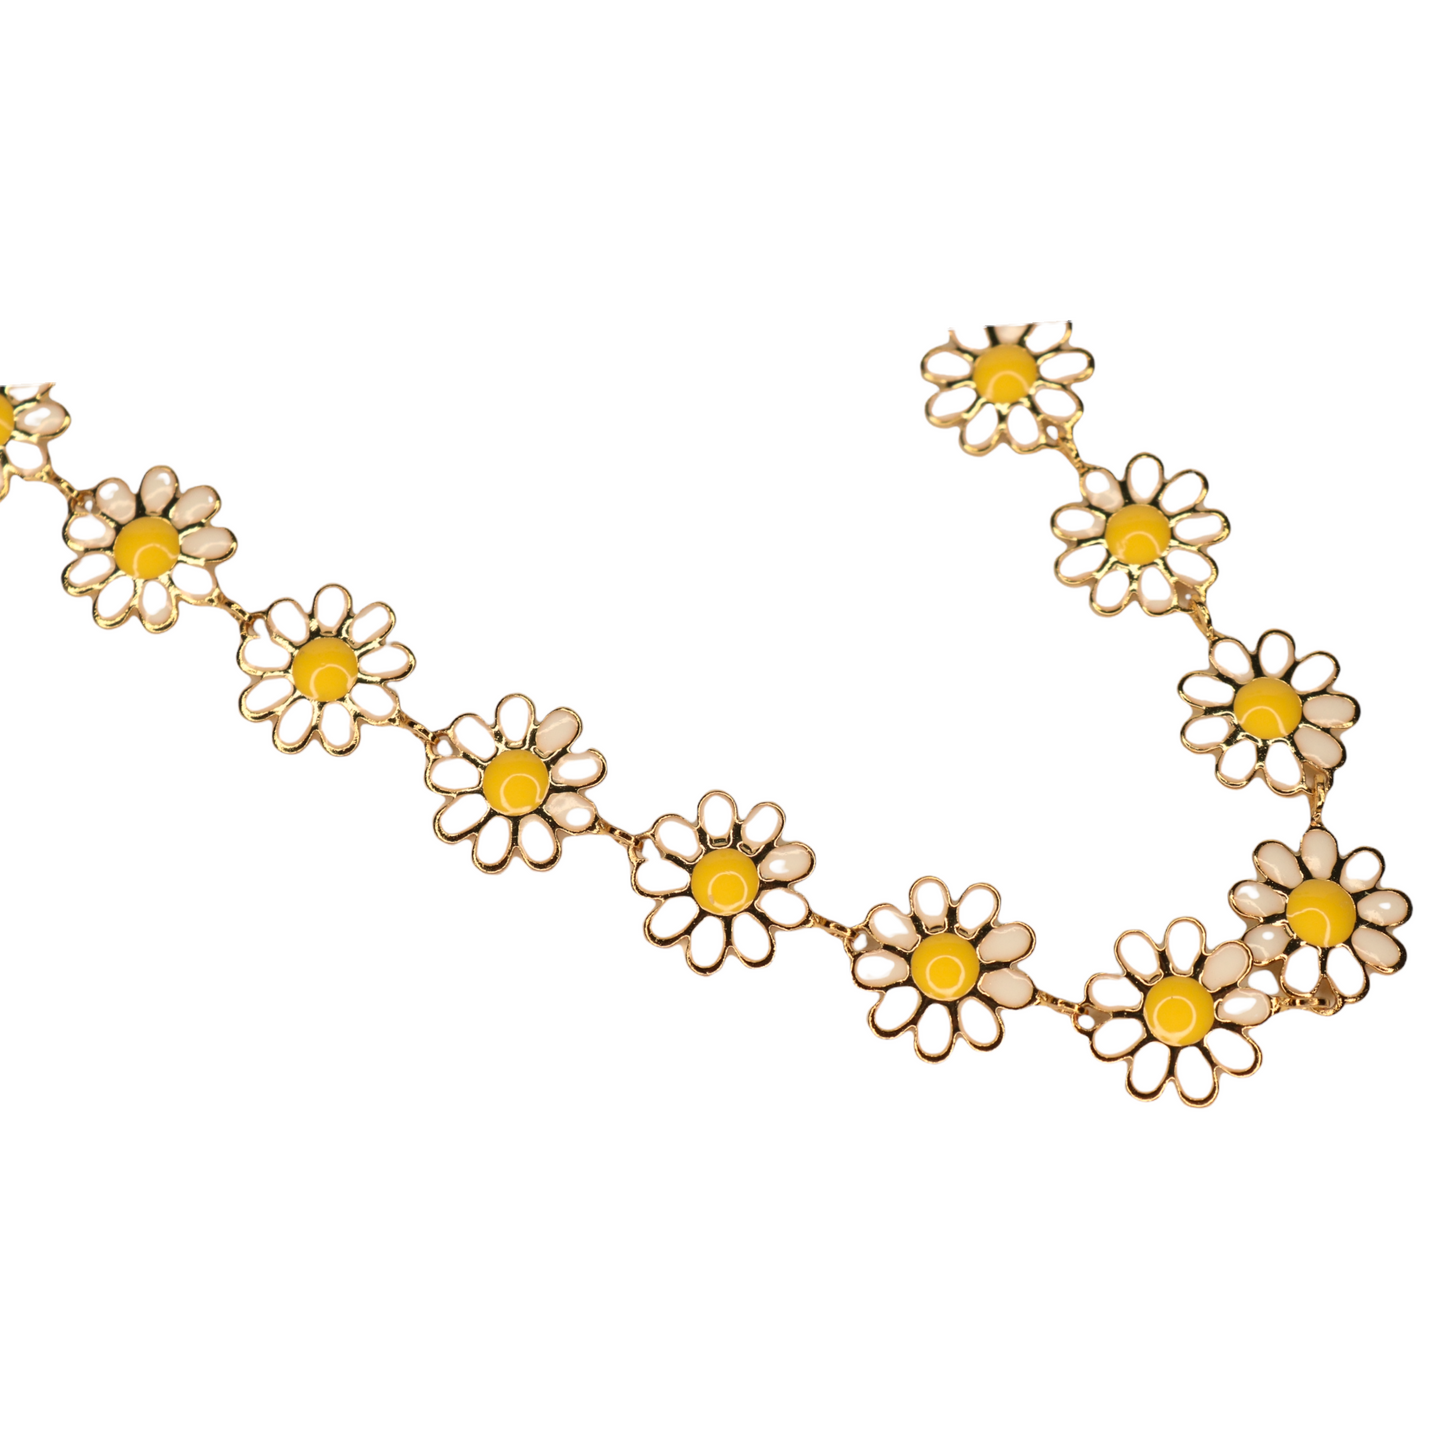 ONLY DAISIES WHITE NECKLACE